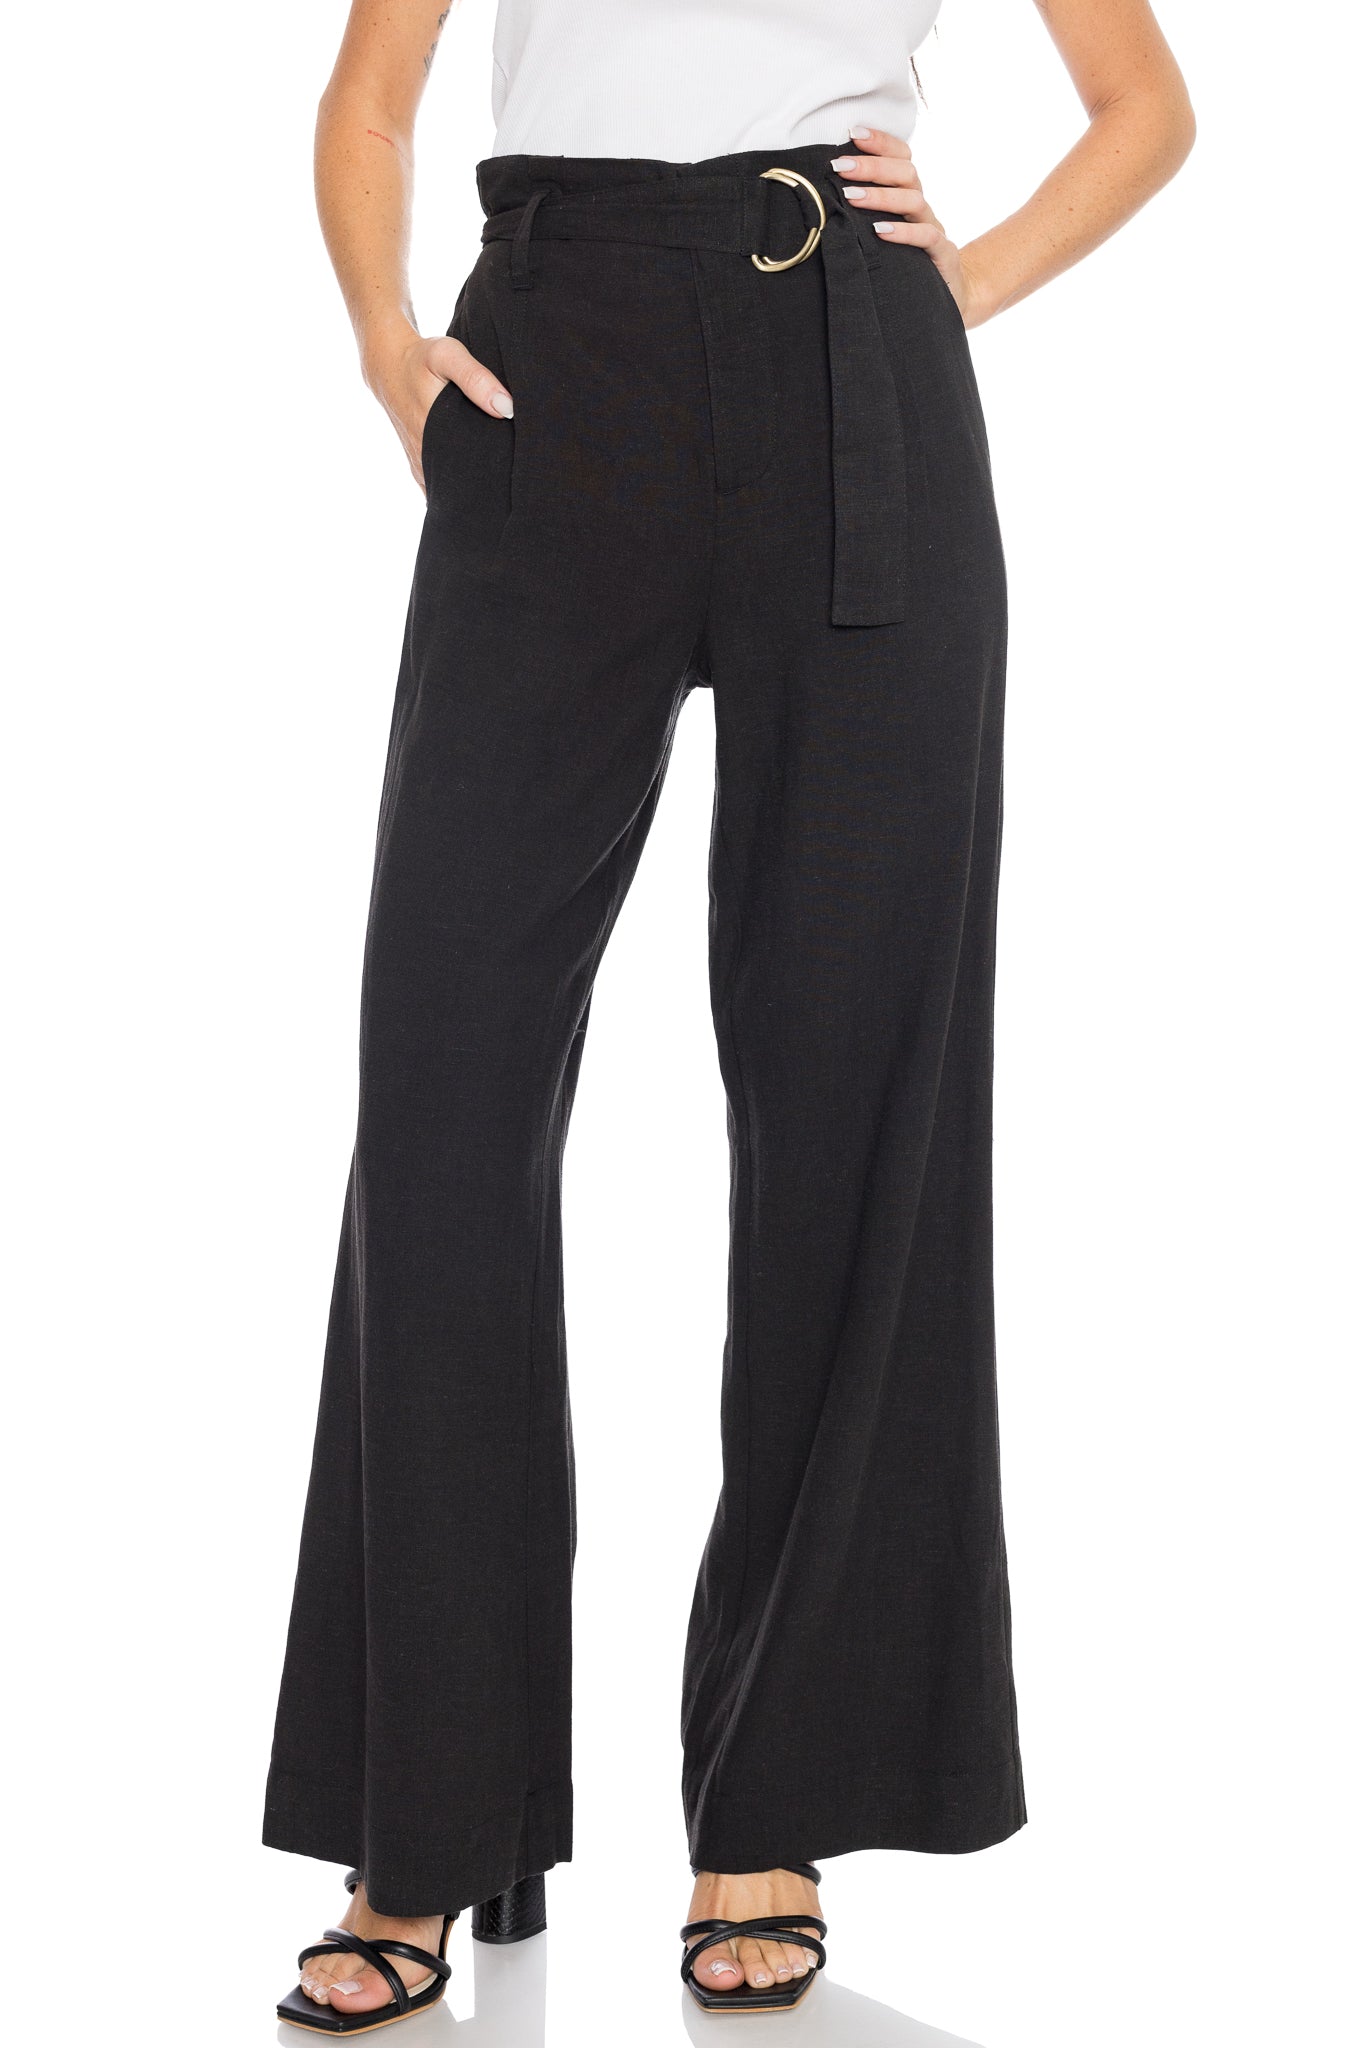 Pheobe Pant by Saltwater Luxe